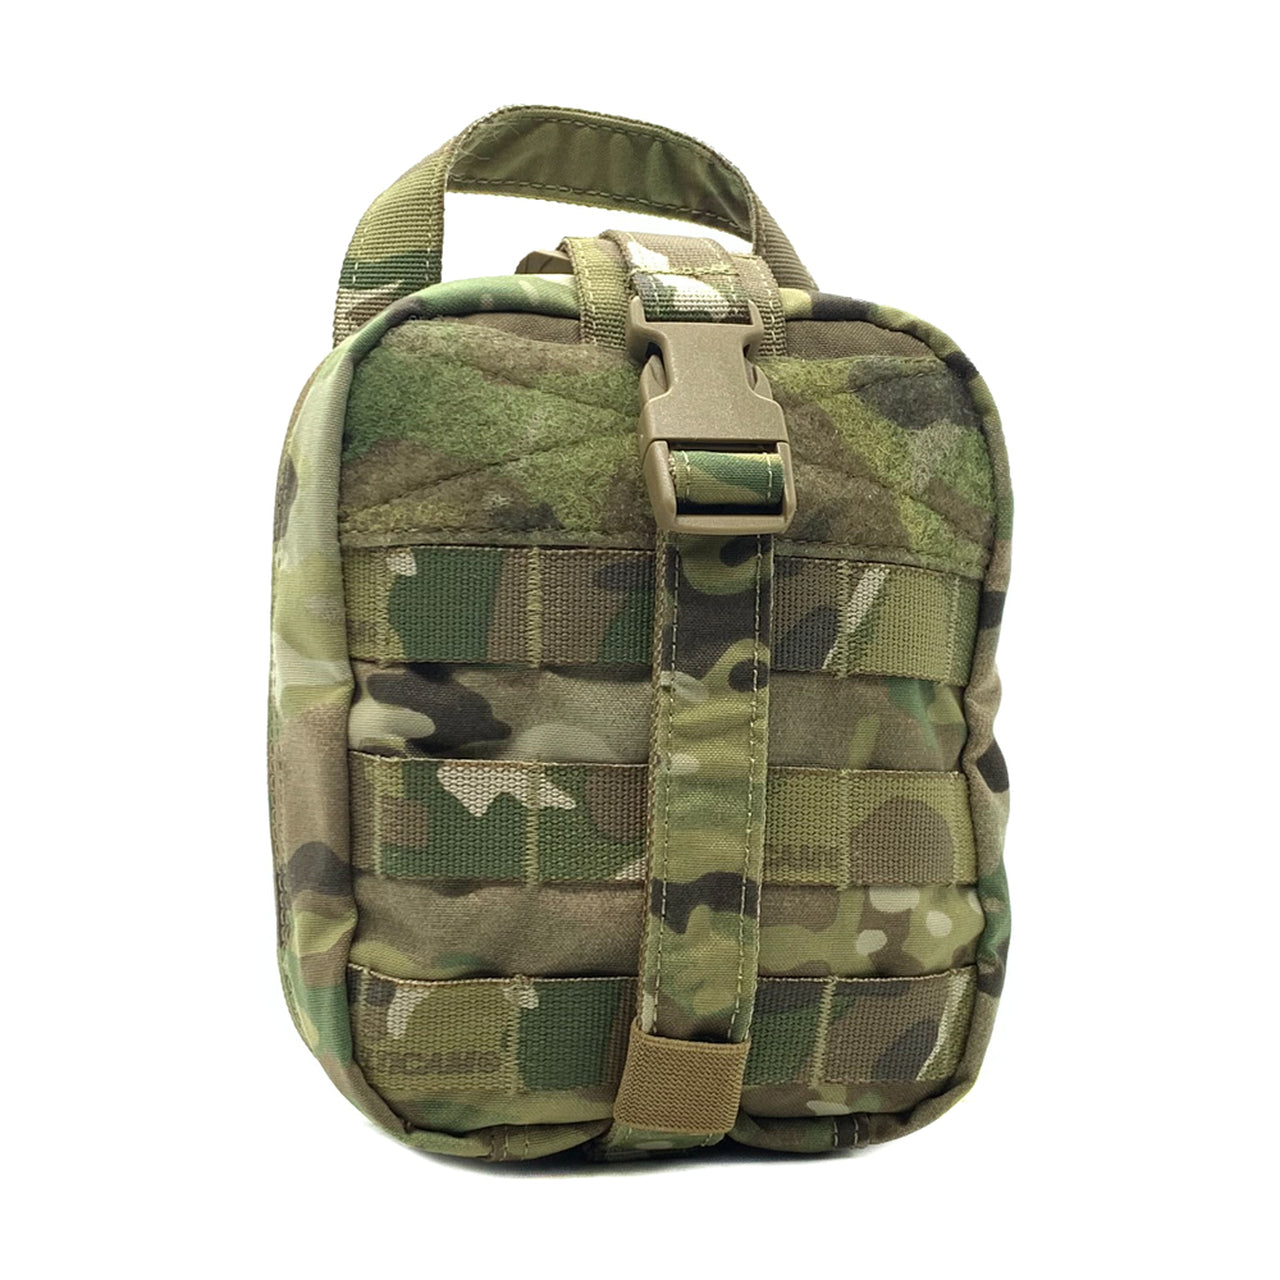 A Shellback Tactical Rip Away Medic Pouch on a white background.